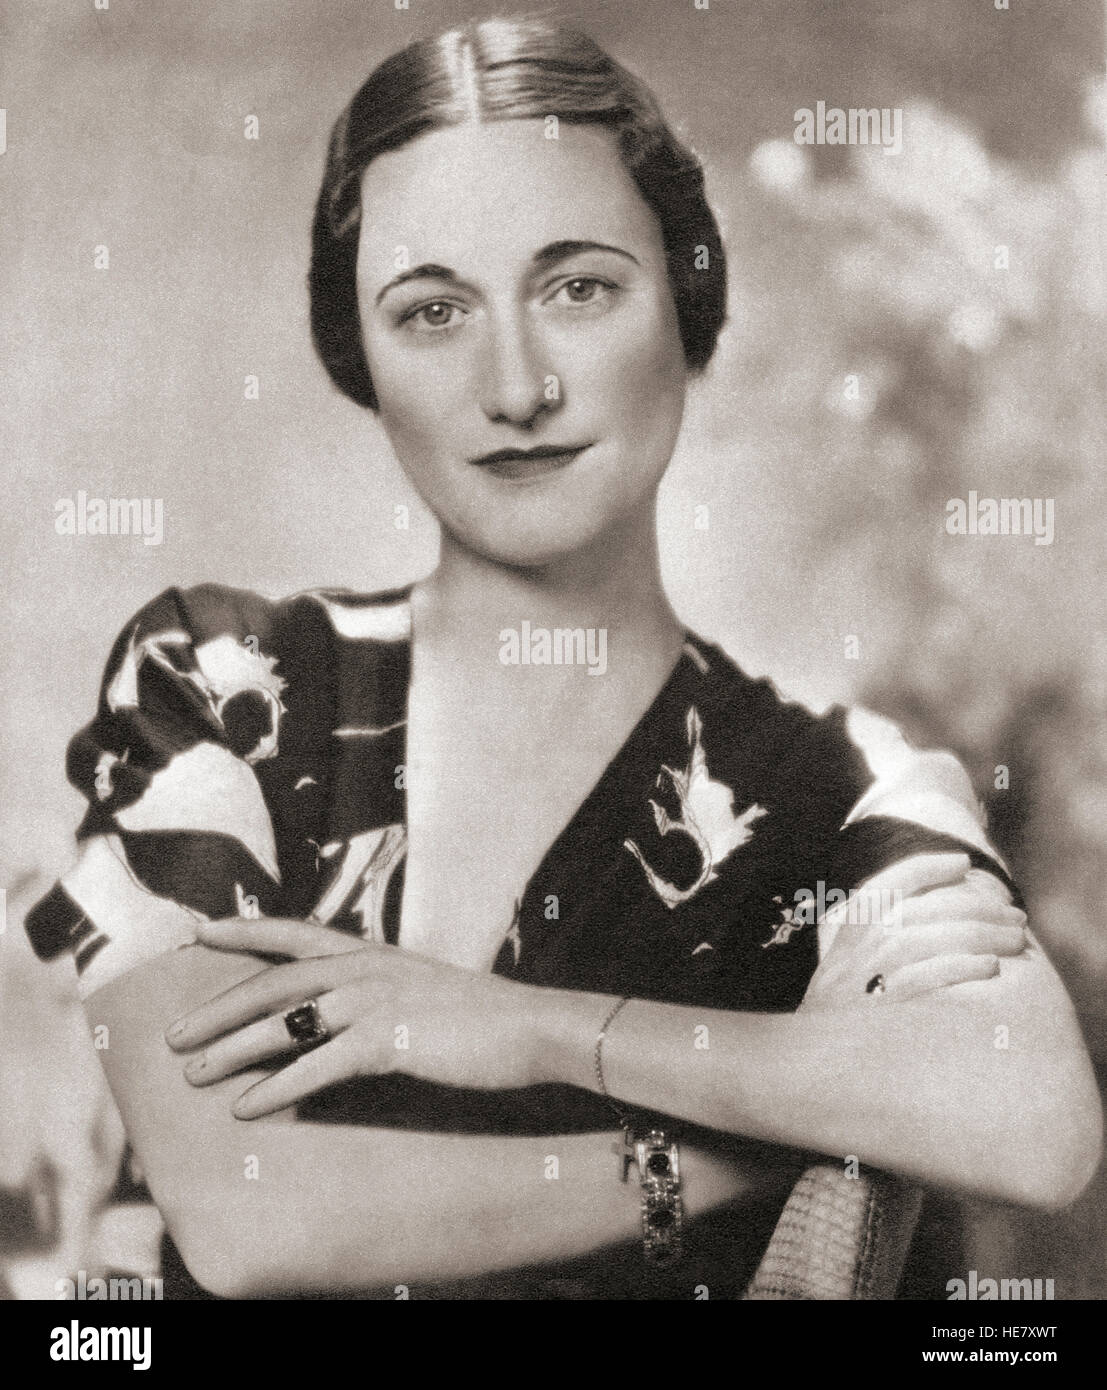 Wallis Simpson, later the Duchess of Windsor, born Bessie Wallis Warfield, 1896 – 1986. American socialite for whom King Edward VIII abdicated in 1936. Stock Photo